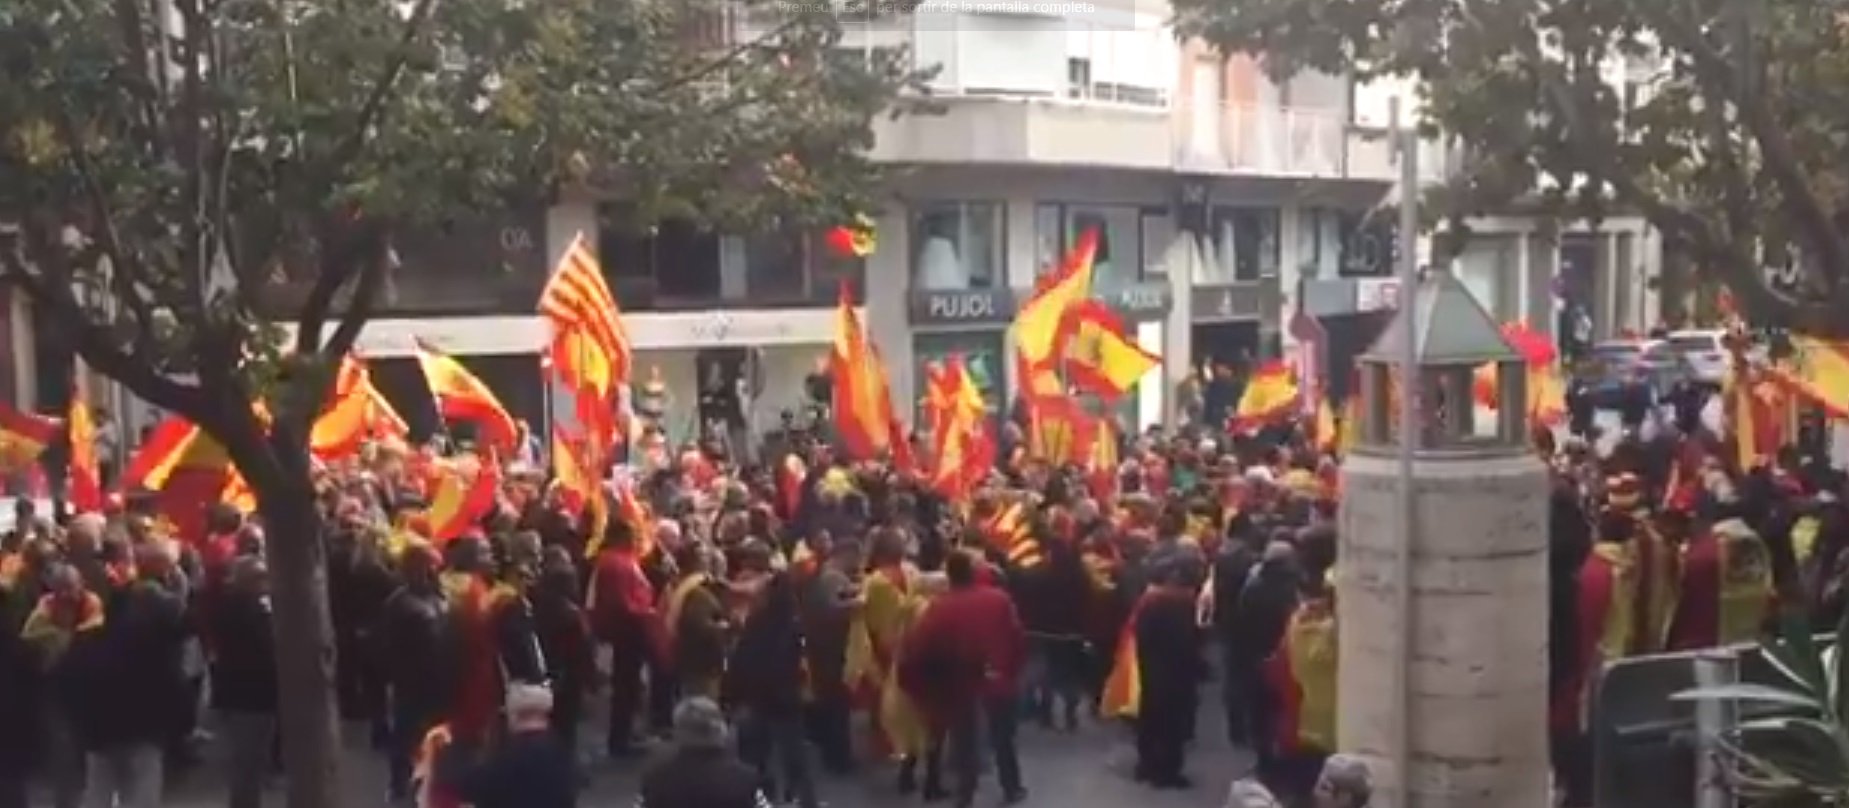 Violent unionists injure man in small Catalan town